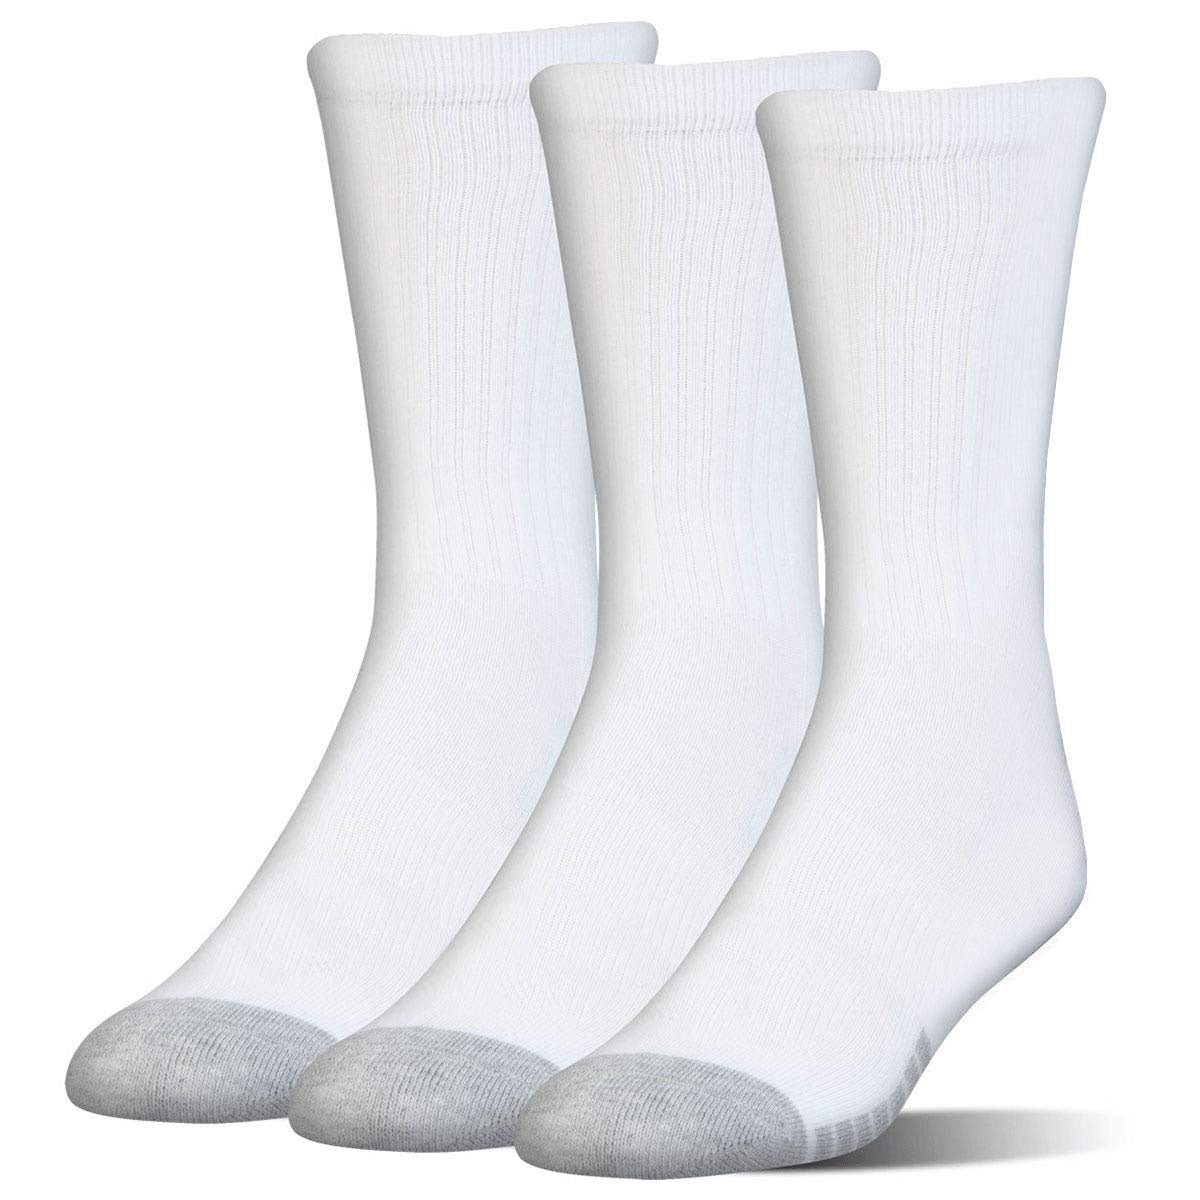 Under Armour Crew Adult Socks (3 Pack)